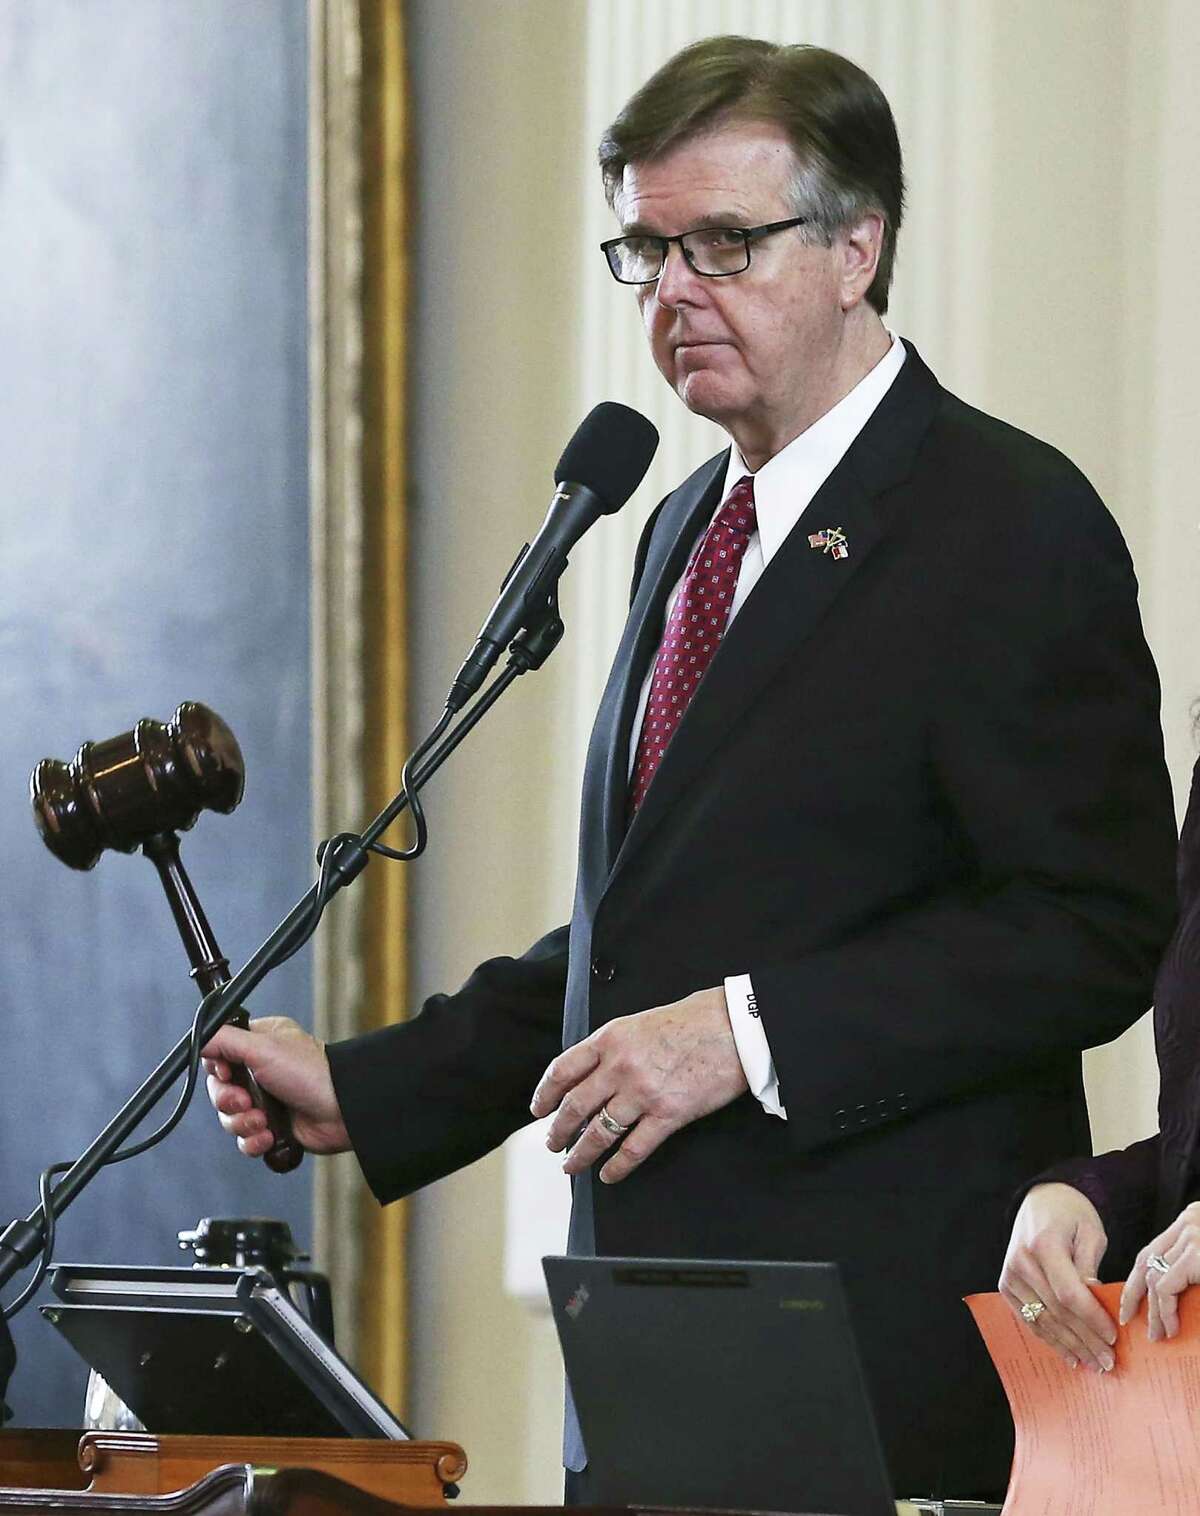 Lt. Governor Dan Patrick gavels a point on the ethics bill which came up before lawmakers debated the sanctuary cities bill in the Senate on February 7, 2017.